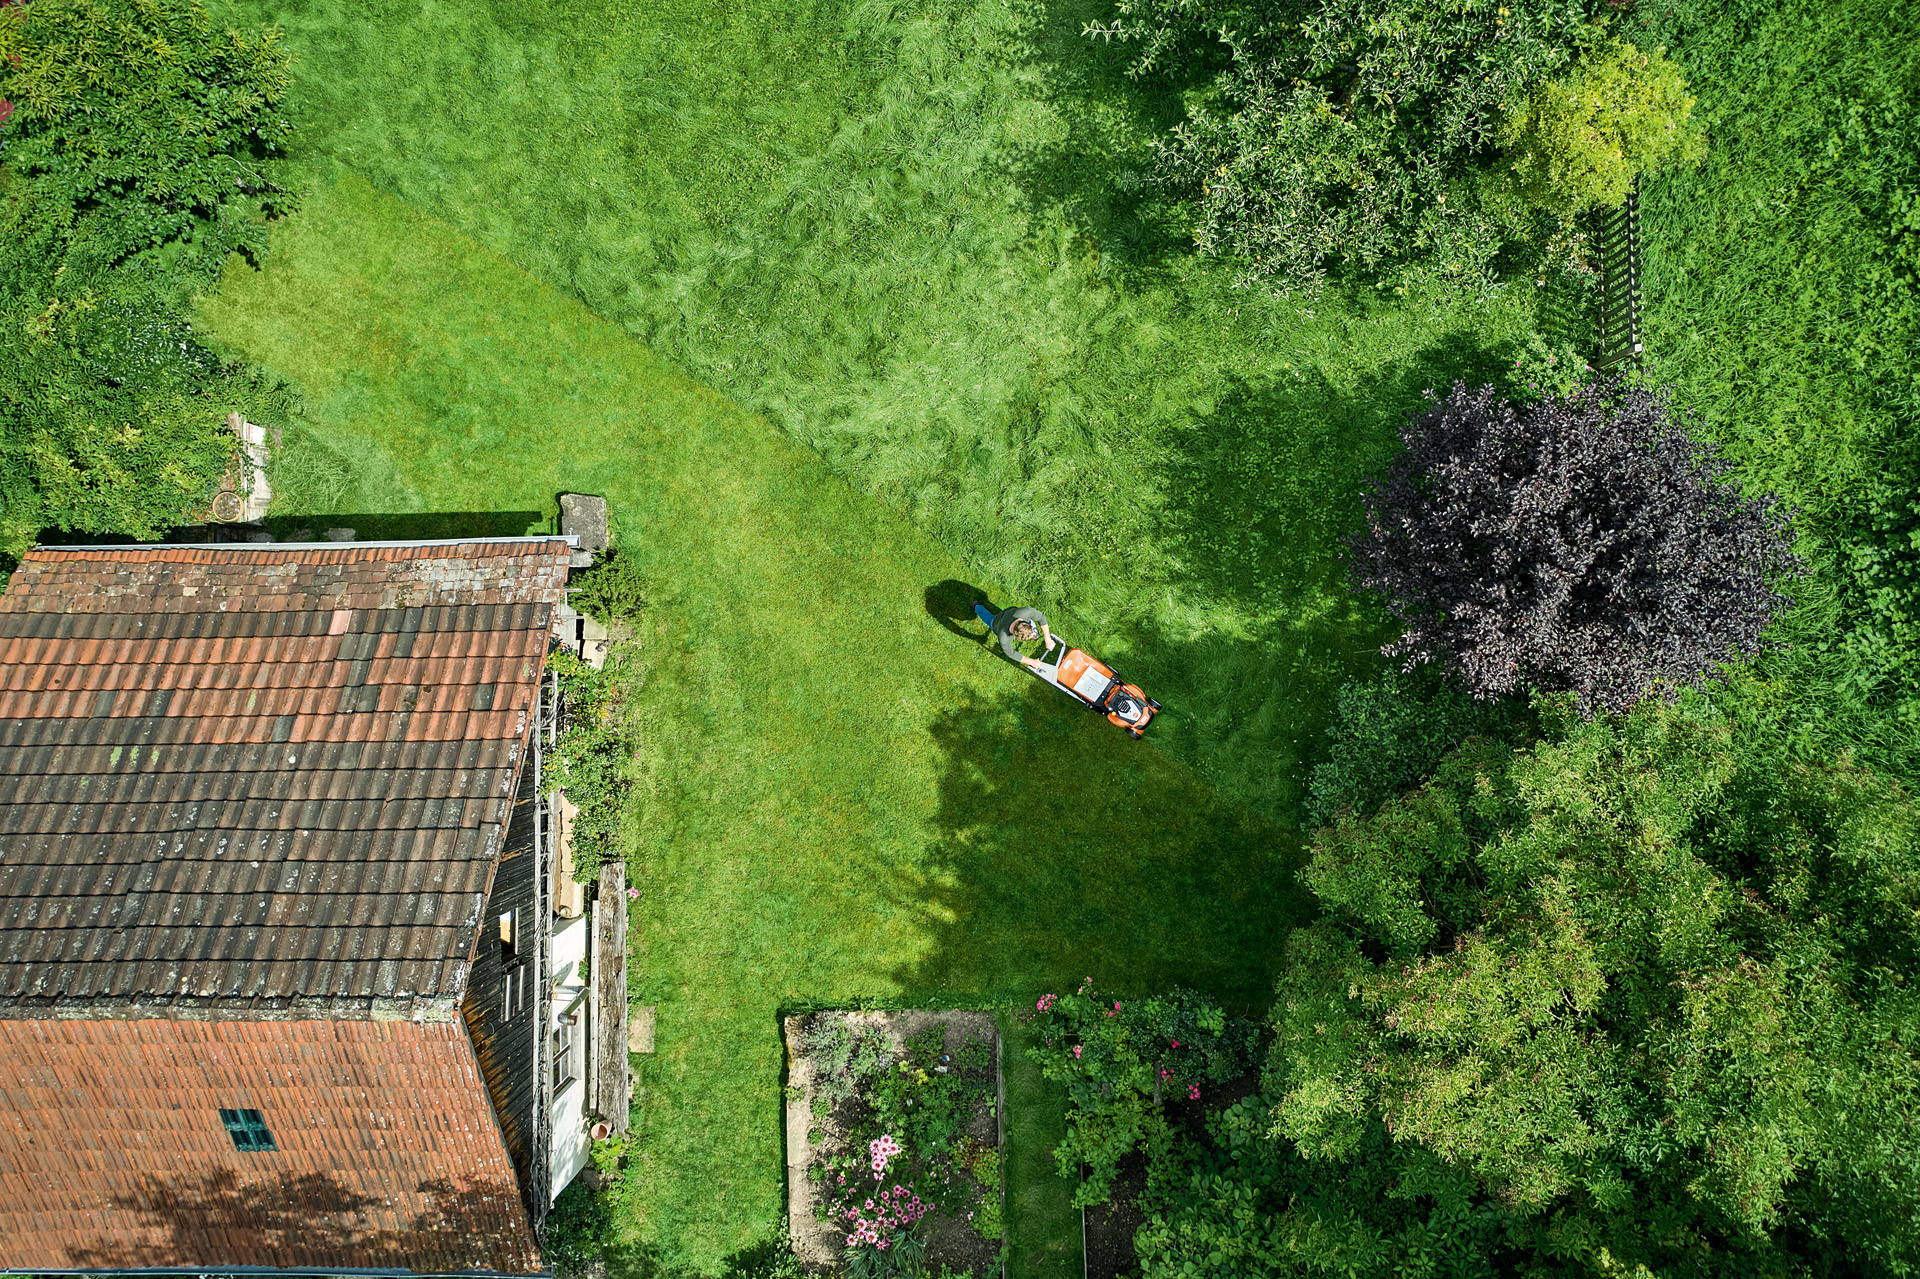 Aerial view of a person mowing a lawn with RM 650 petrol lawn mower